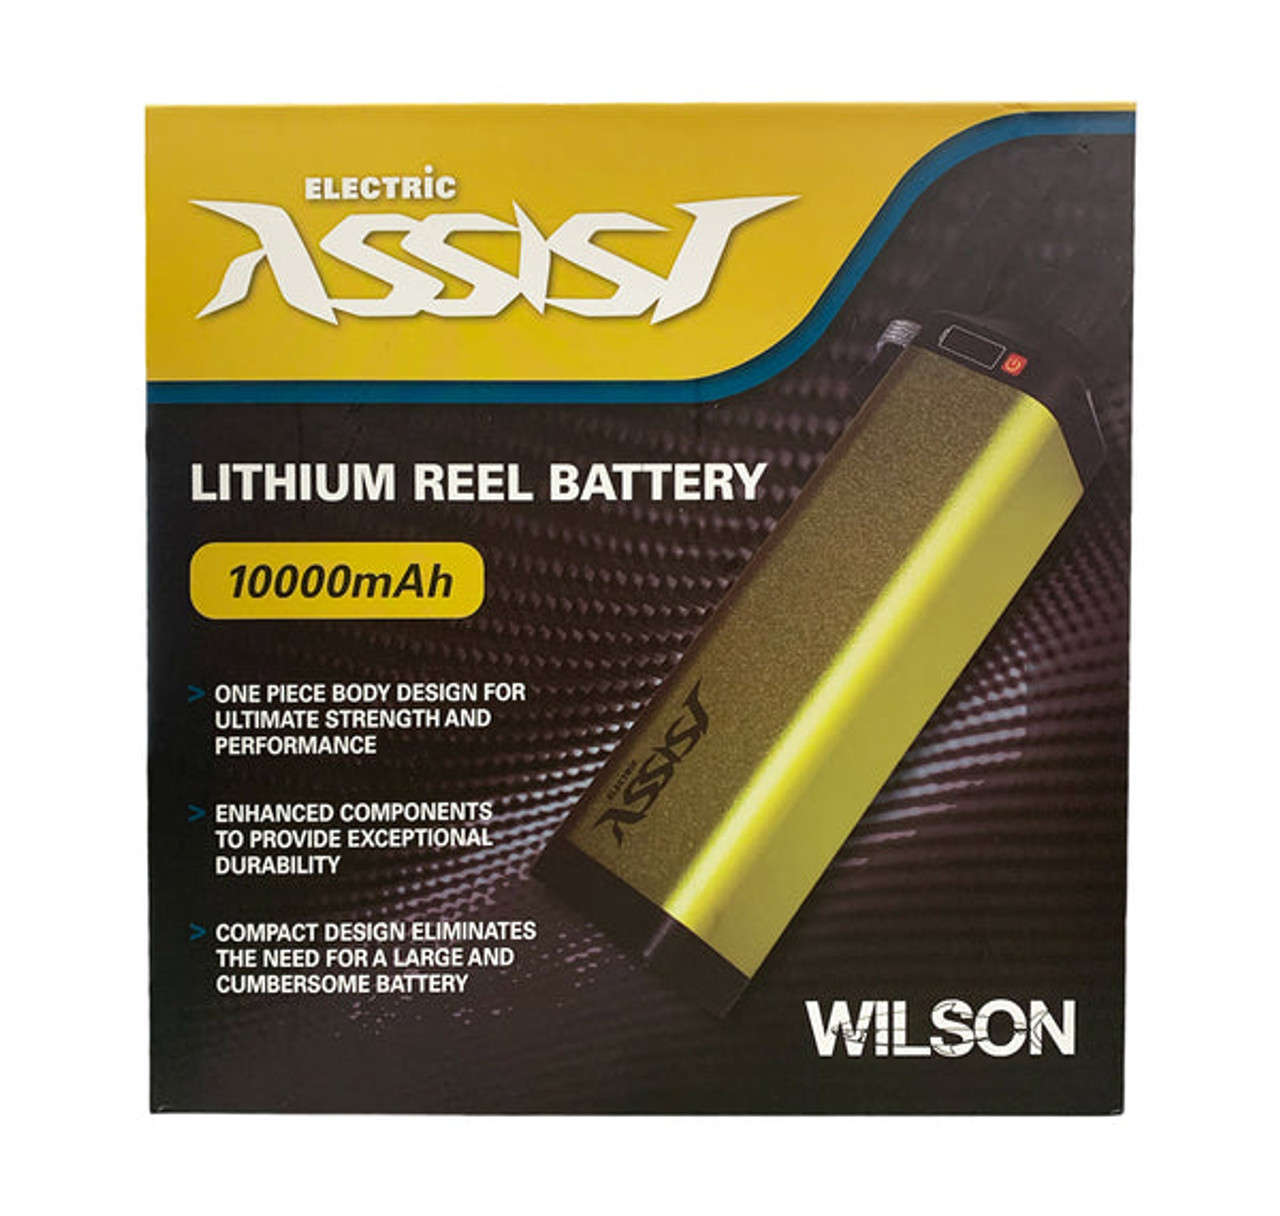 Wilson Electric Reel Assist Lithium Battery